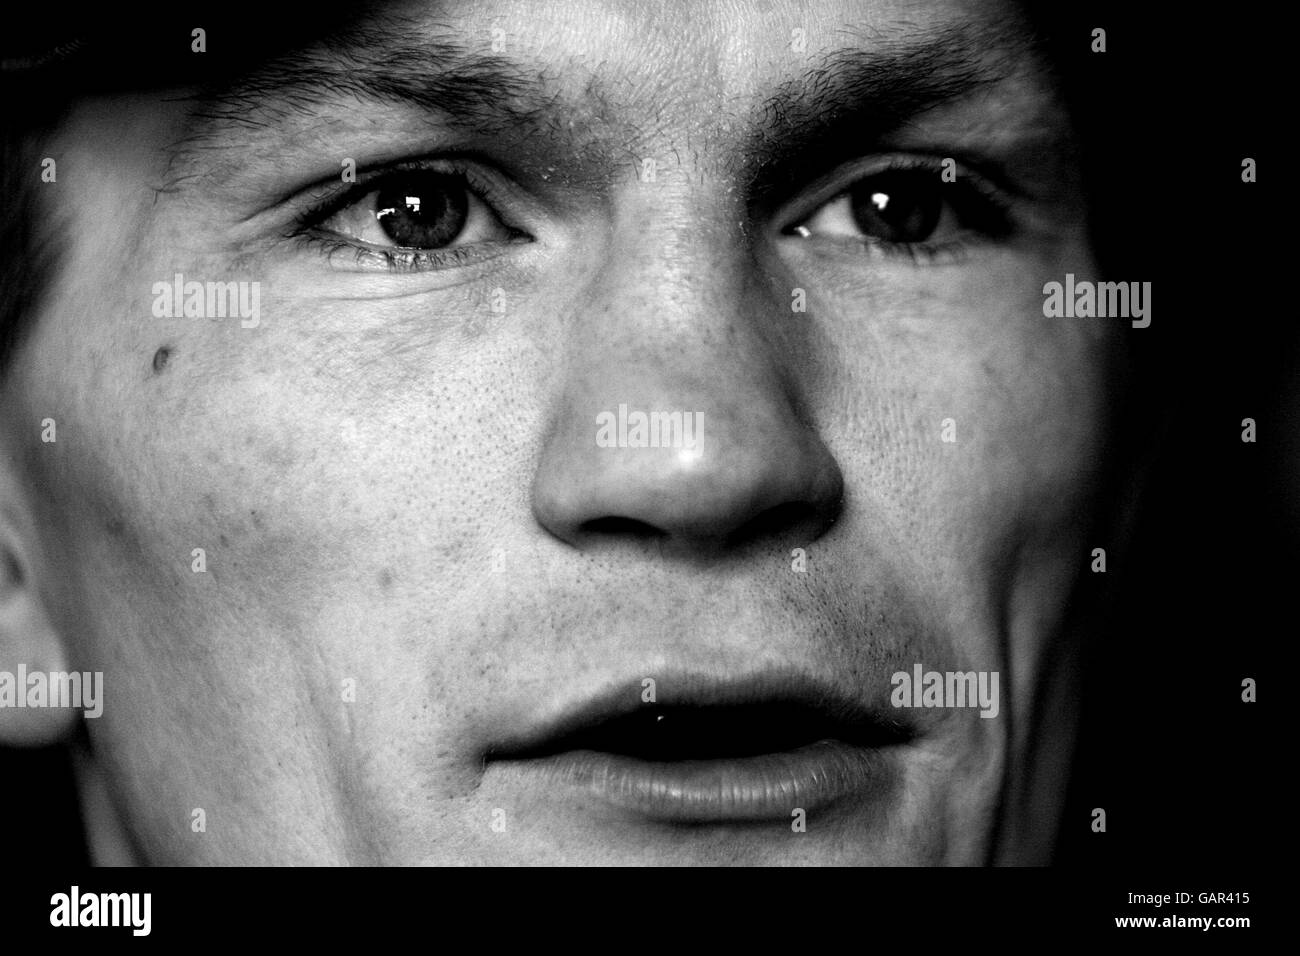 Ricky Hatton after a Media Work Out at Betta Bodies Gym, Denton, Manchester. Stock Photo